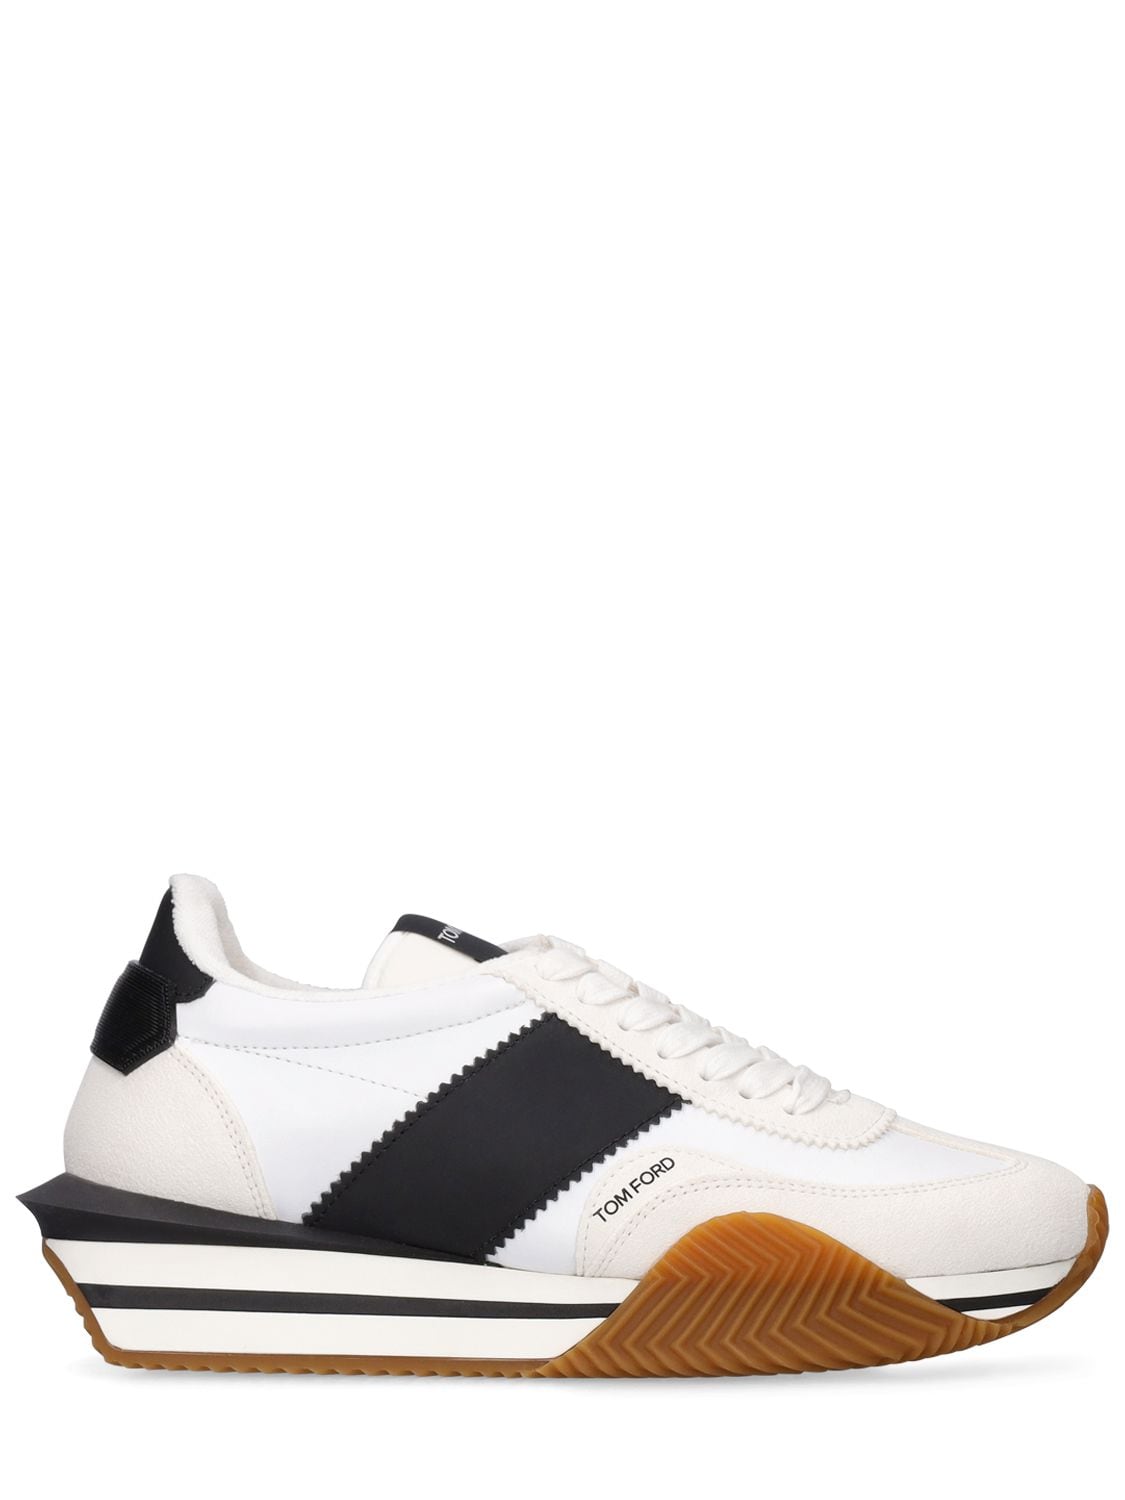 Tom Ford Men's Two-toned Low-top Sneakers In Black&white